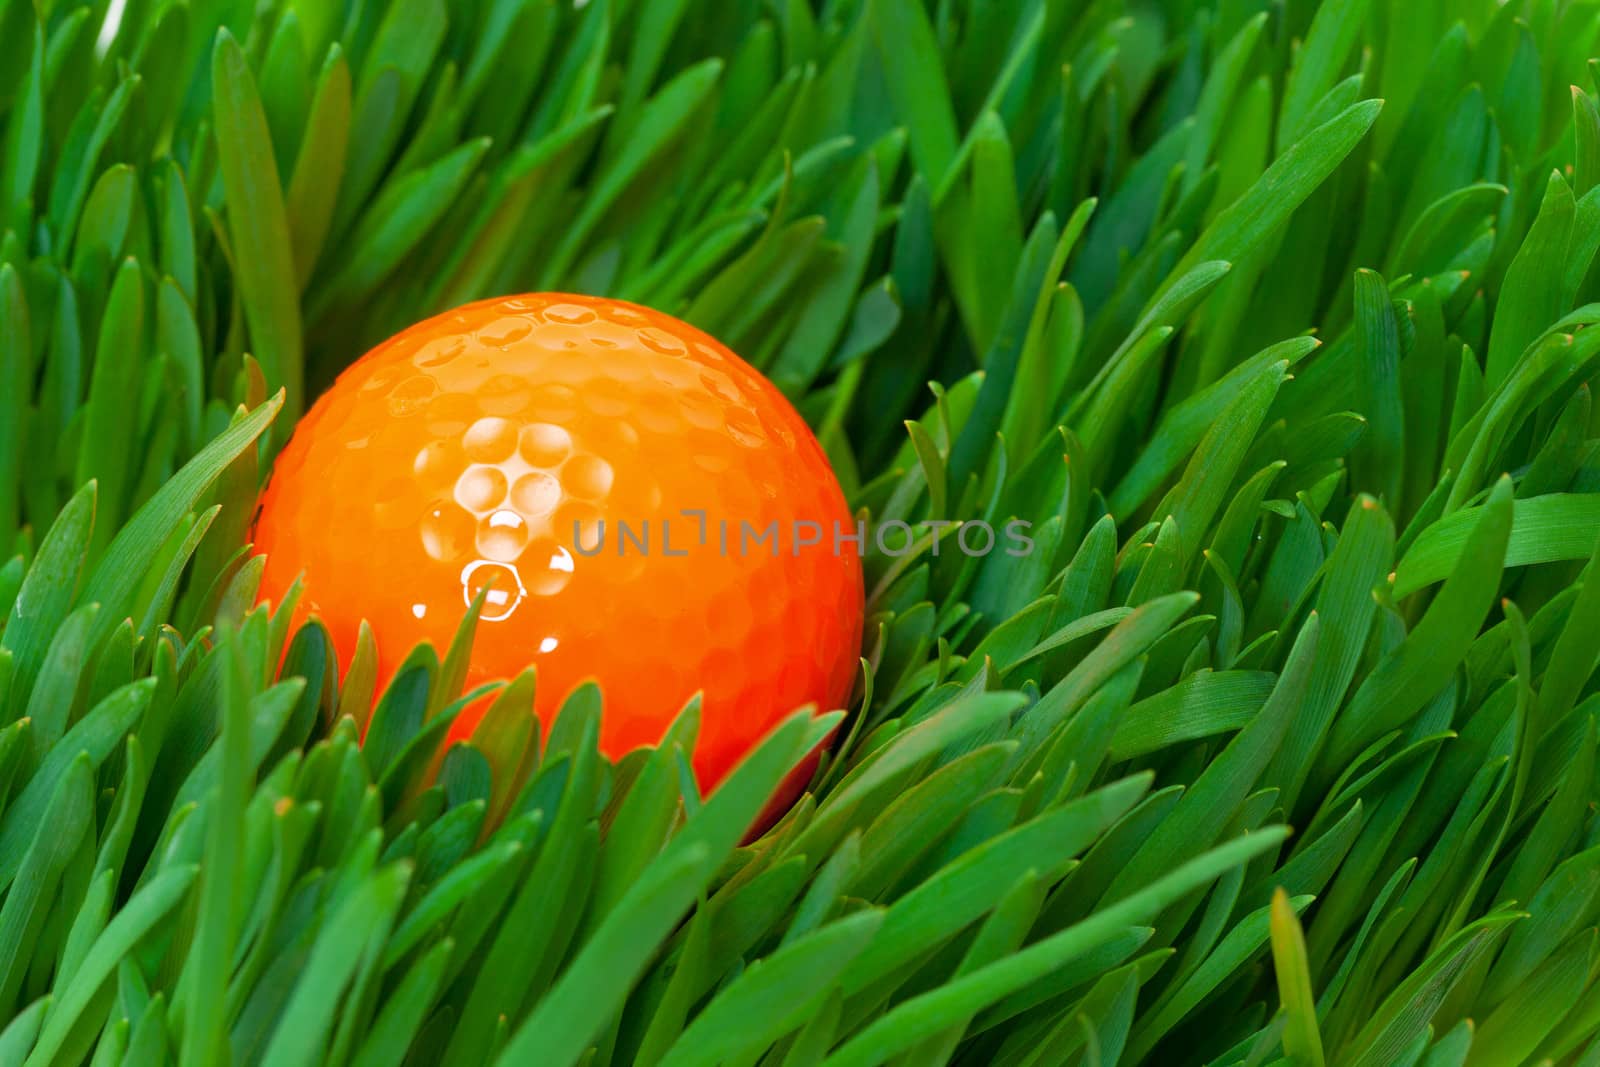 Orange golf ball in the long grass by Discovod